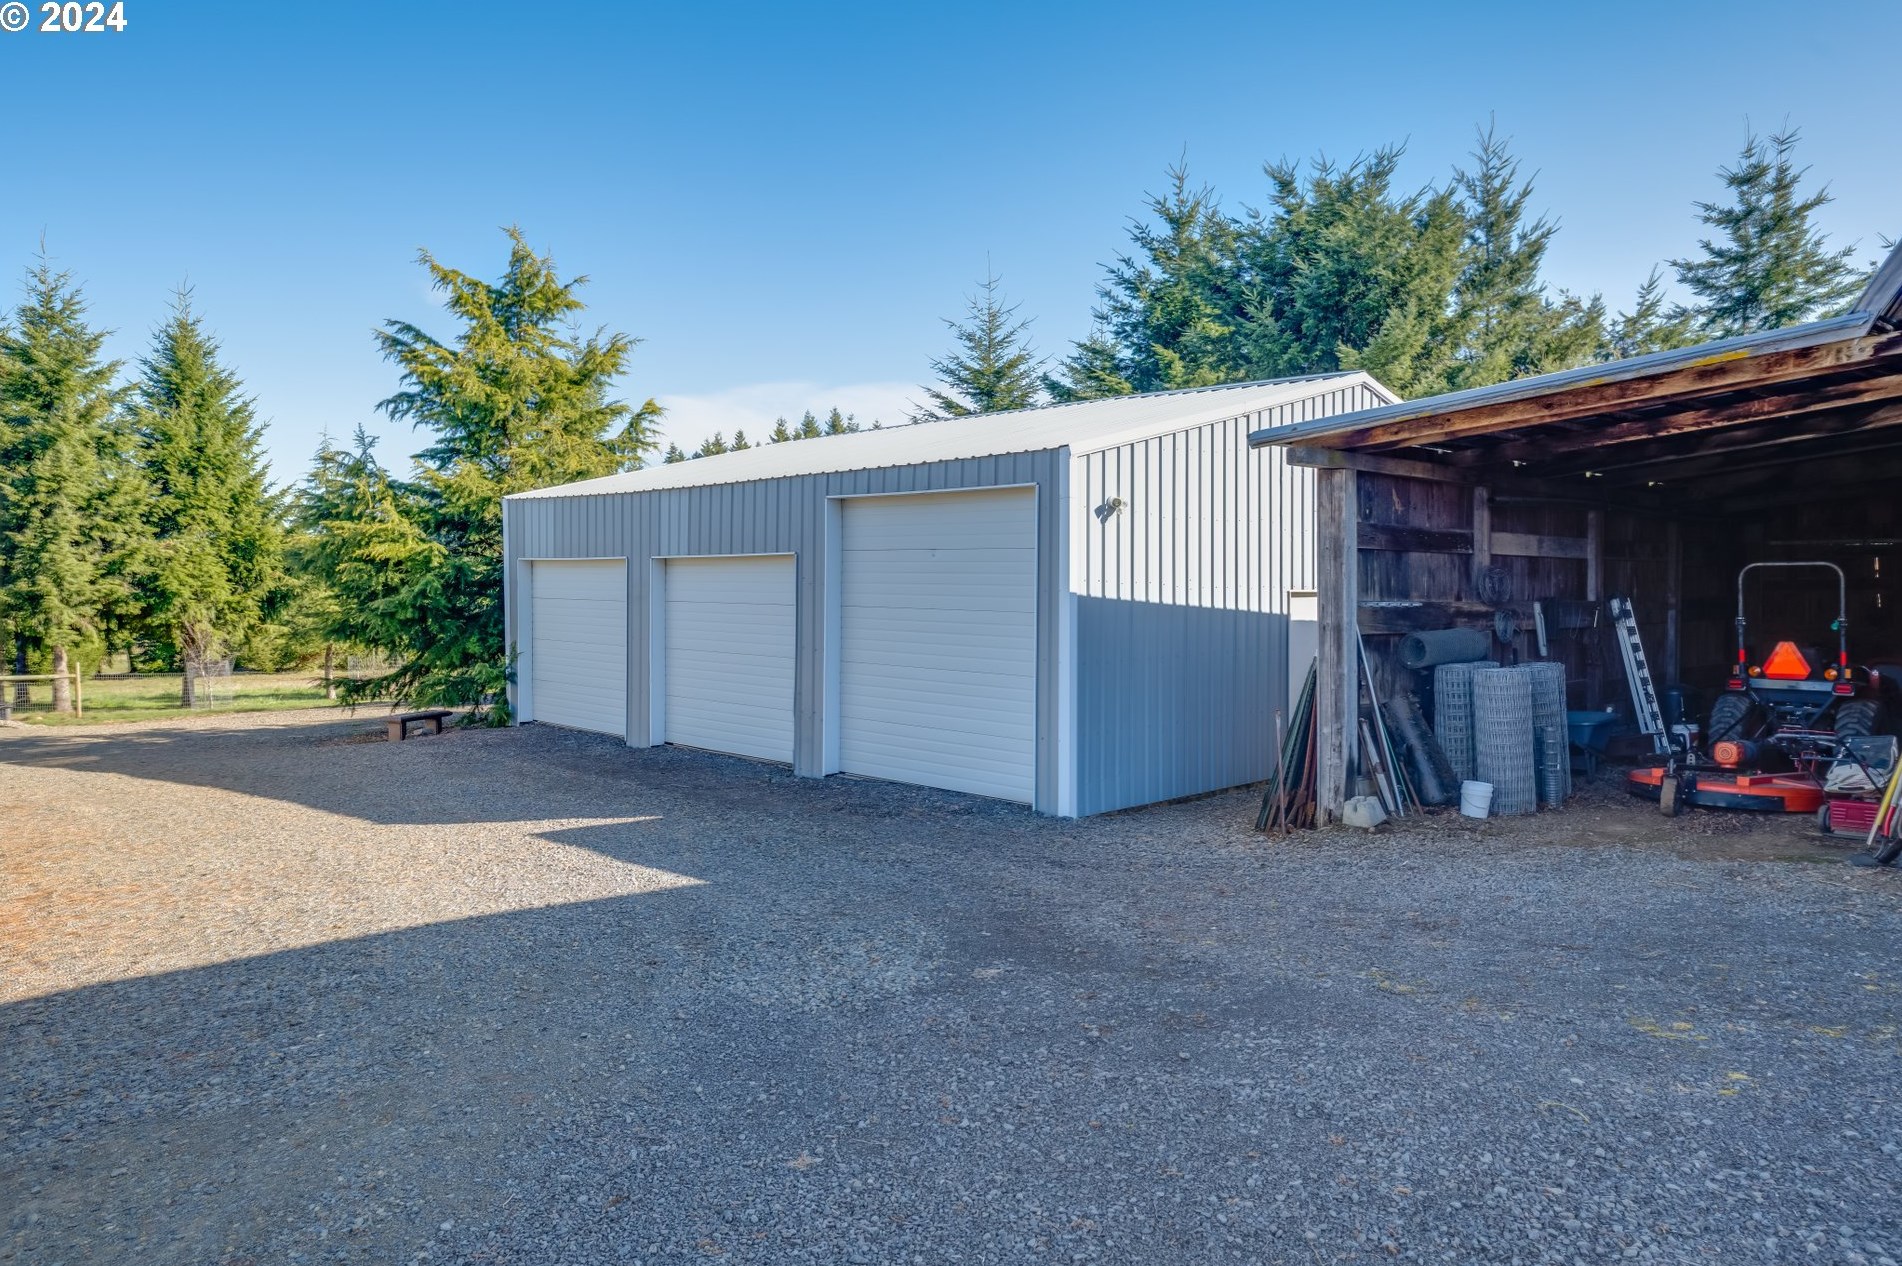 36076 Sawtell Rd, Liberal, OR 97038